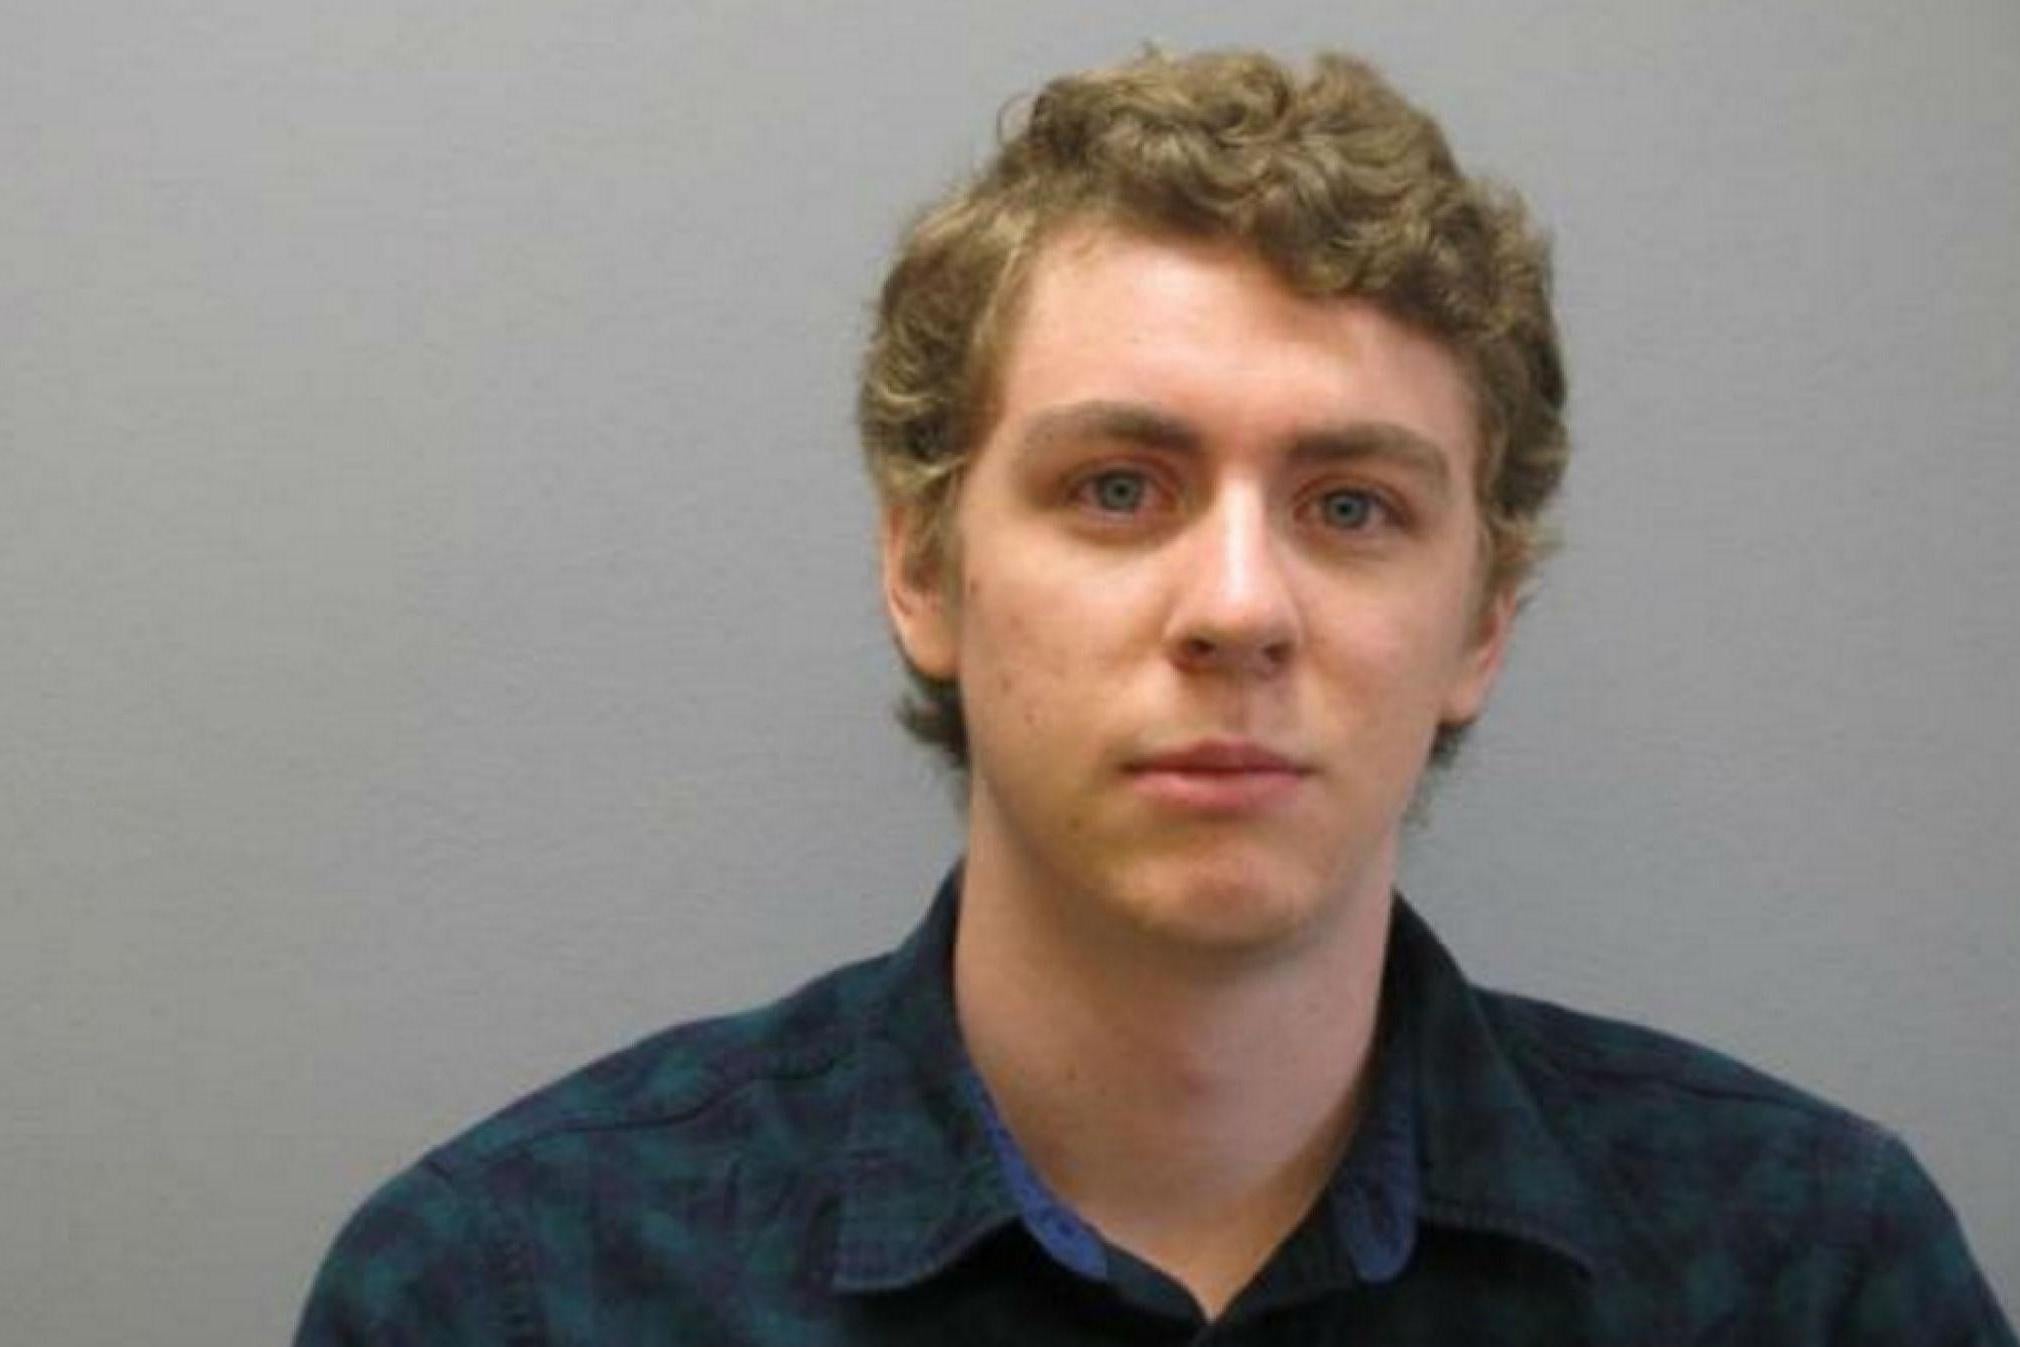 Former Olympic hopeful Brock Turner is appealing his conviction for sexual assault